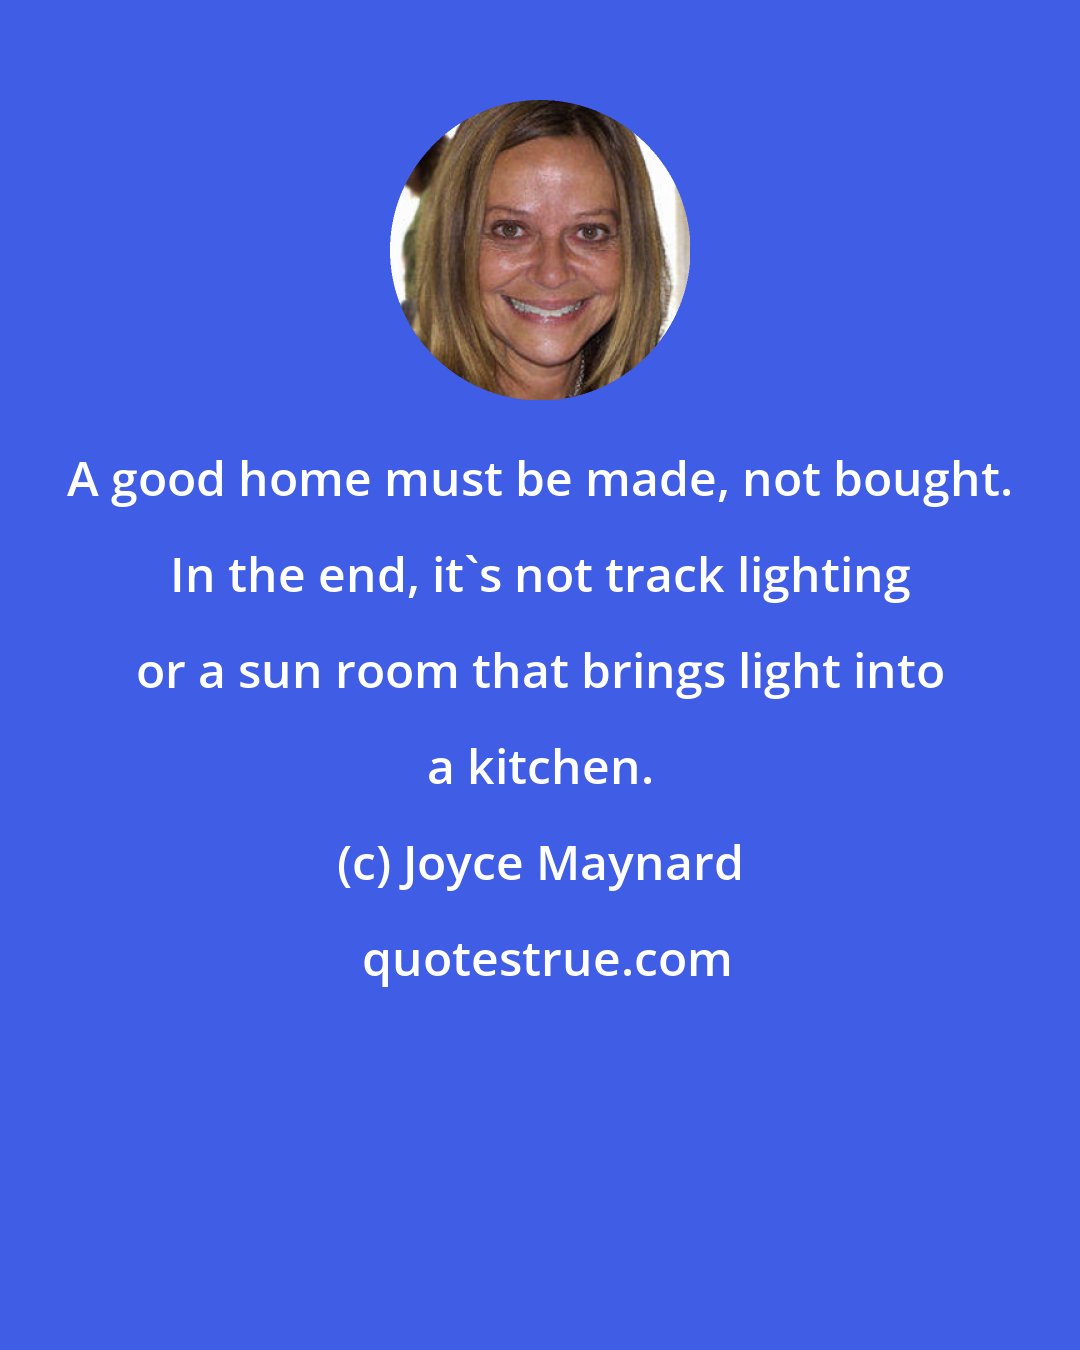 Joyce Maynard: A good home must be made, not bought. In the end, it's not track lighting or a sun room that brings light into a kitchen.